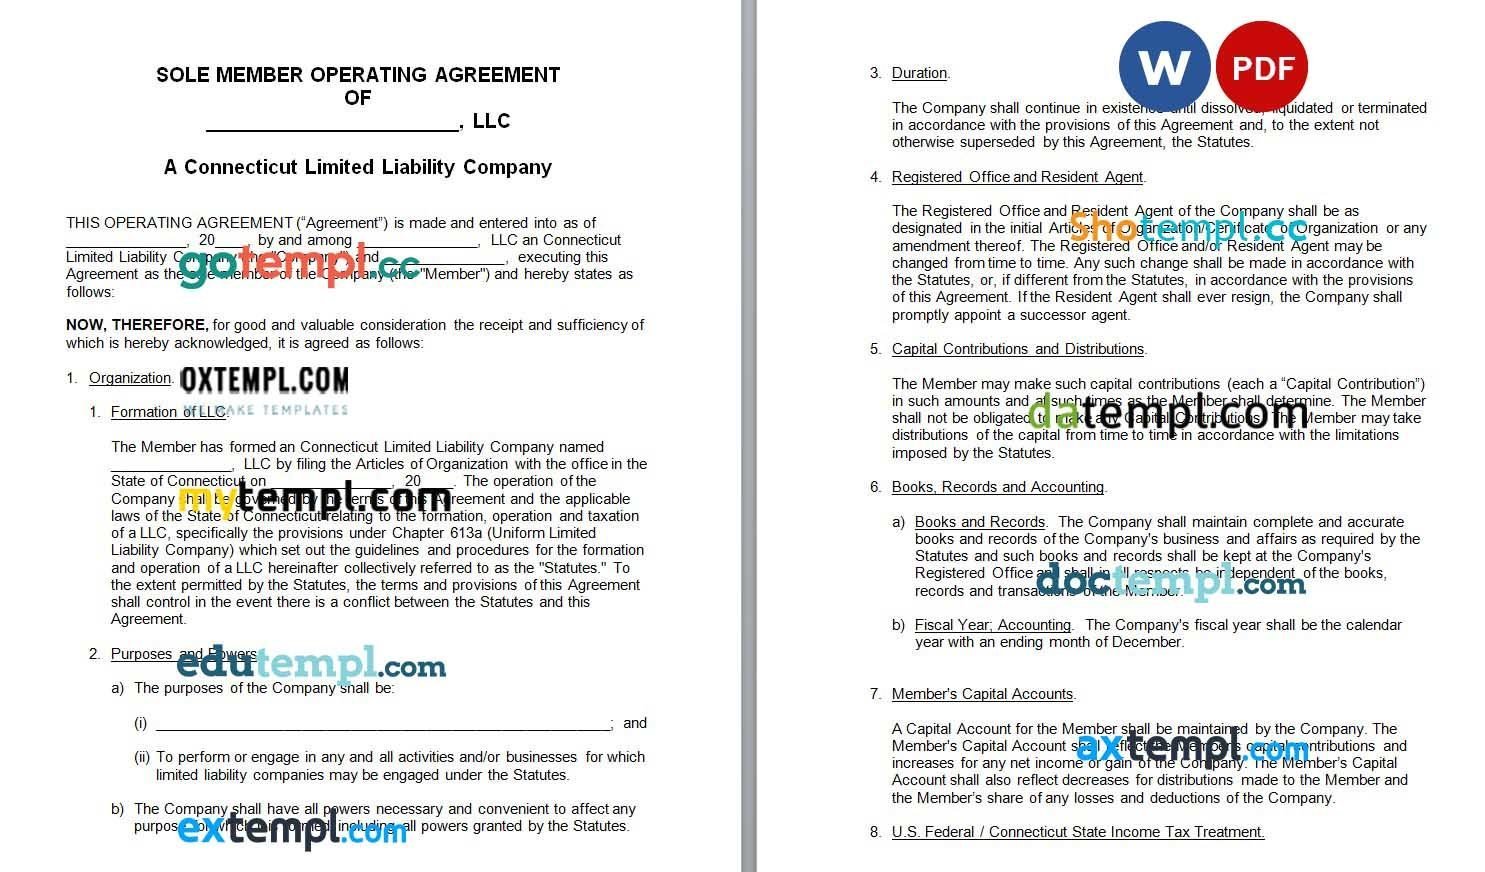 Connecticut Single-Member LLC Operating Agreement Word example, completely editable